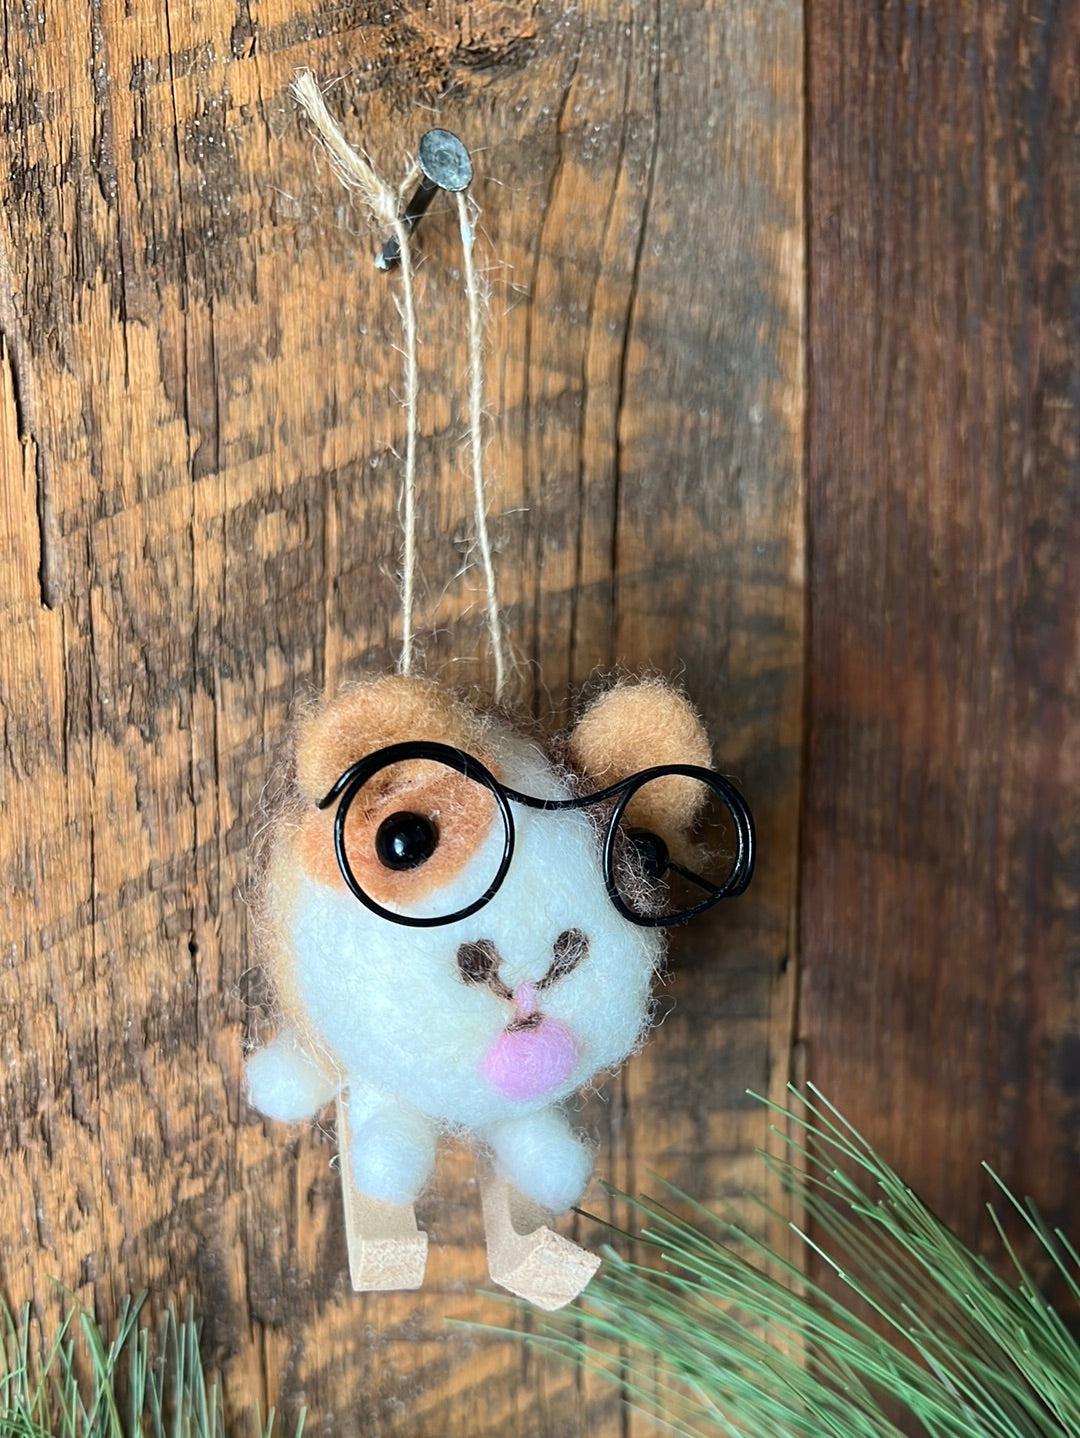 Felt Skiing Hamster with Wire-Rim Glasses Ornament